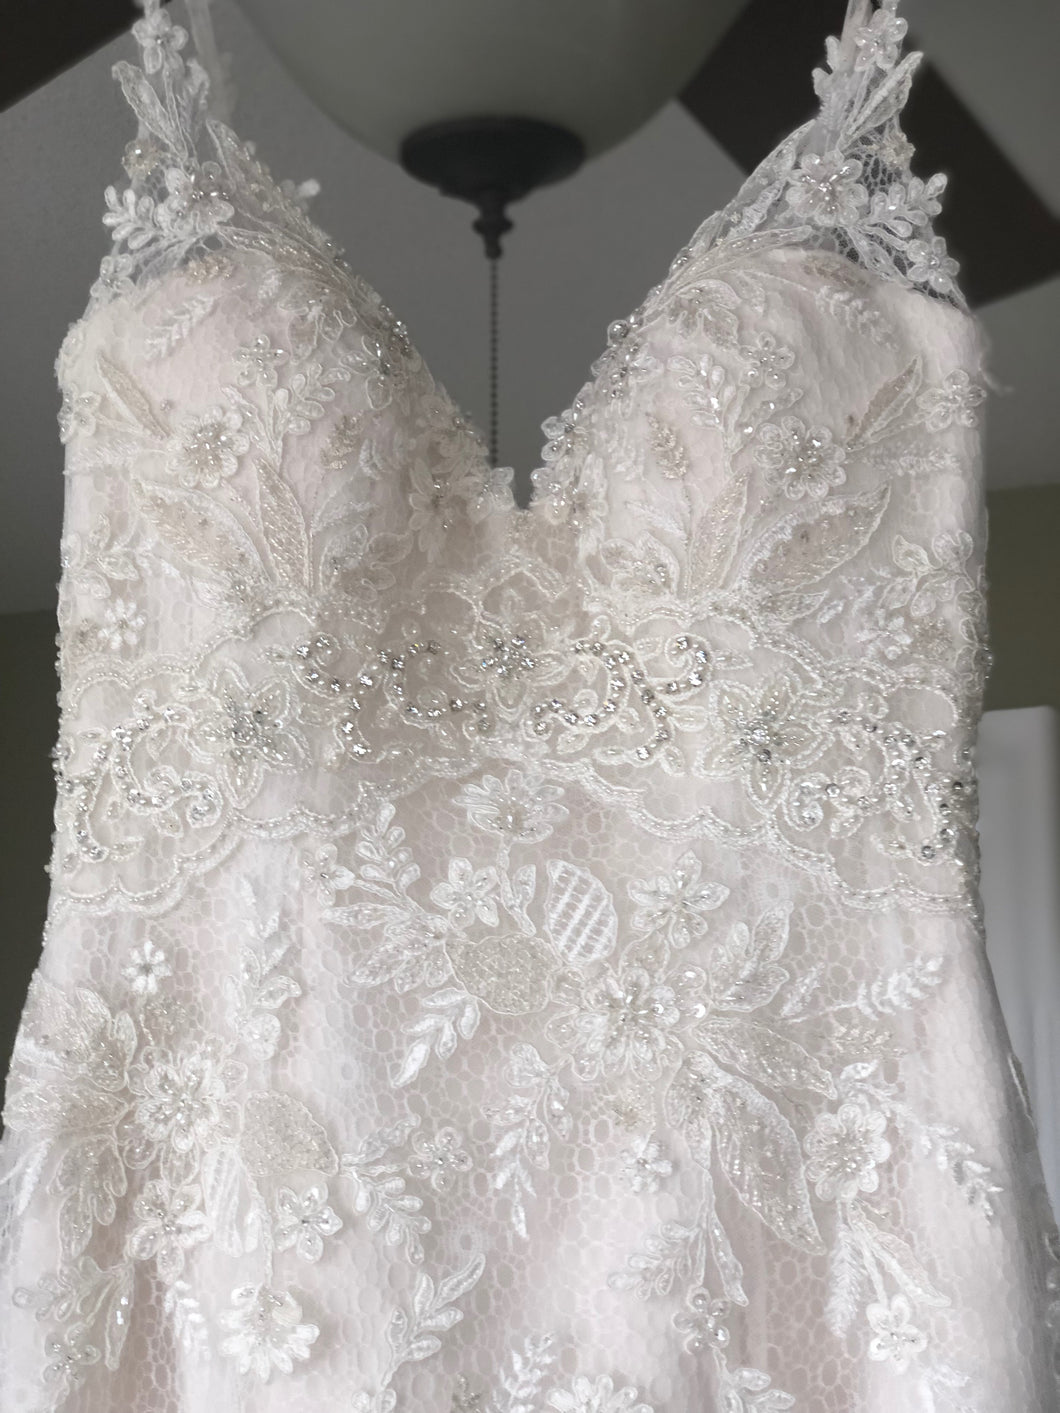 Casablanca 'Sequined Lace' size 6 new wedding dress front view on hanger